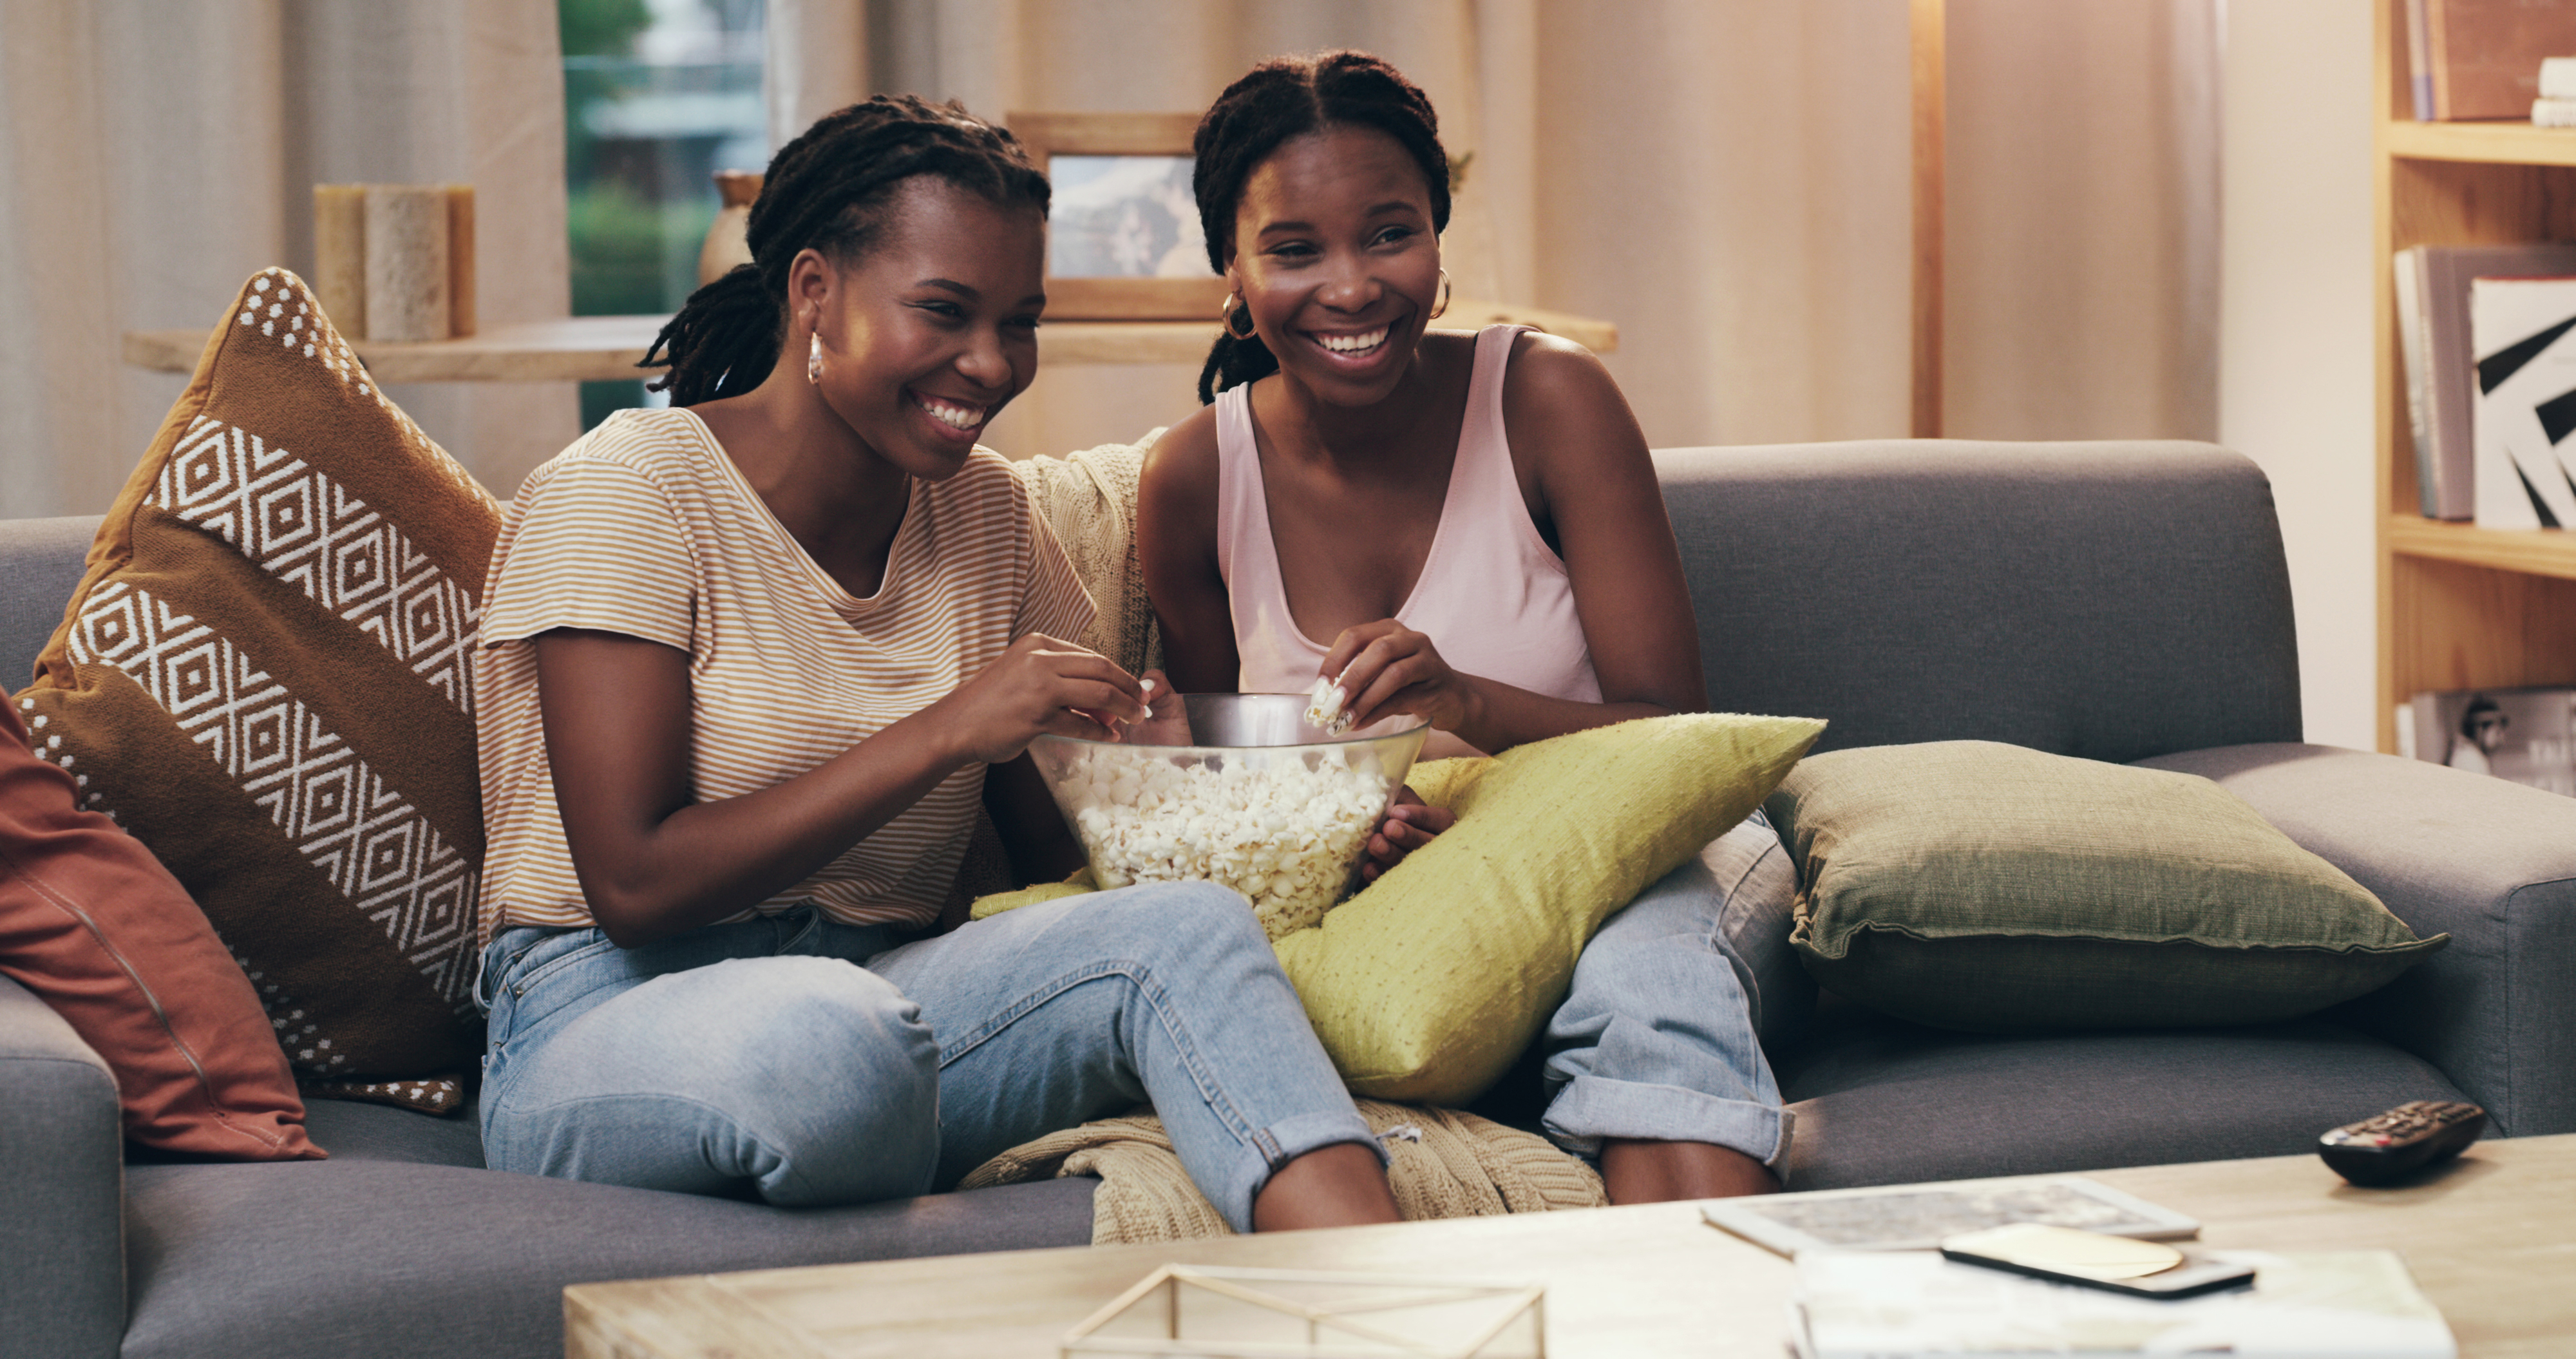 friends sharing a bowl of popcorn on the couch at home